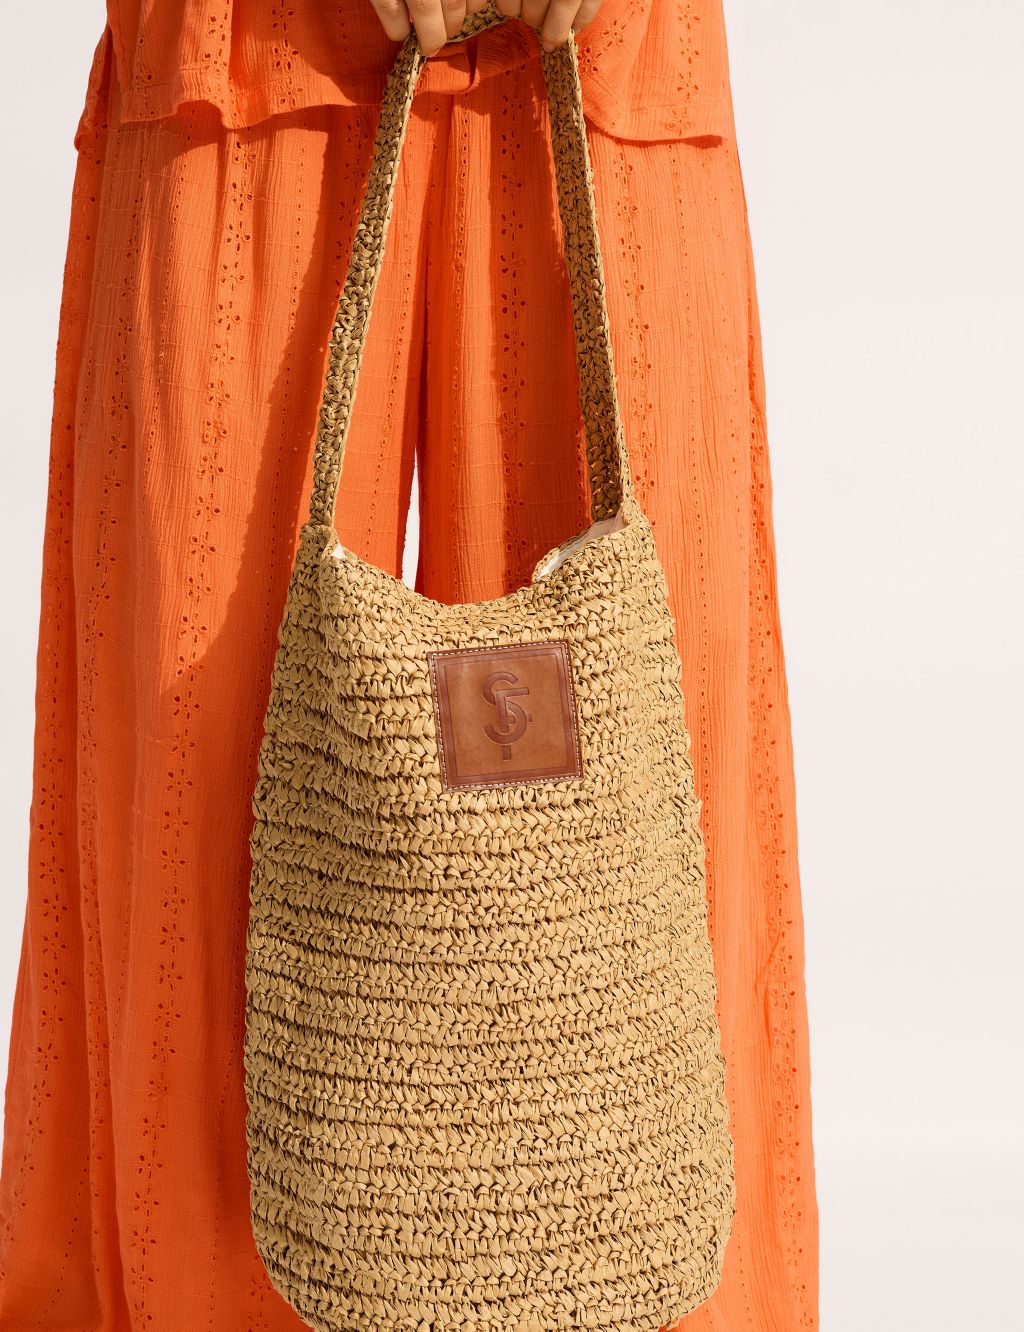 Woven Tote Bag 1 of 4